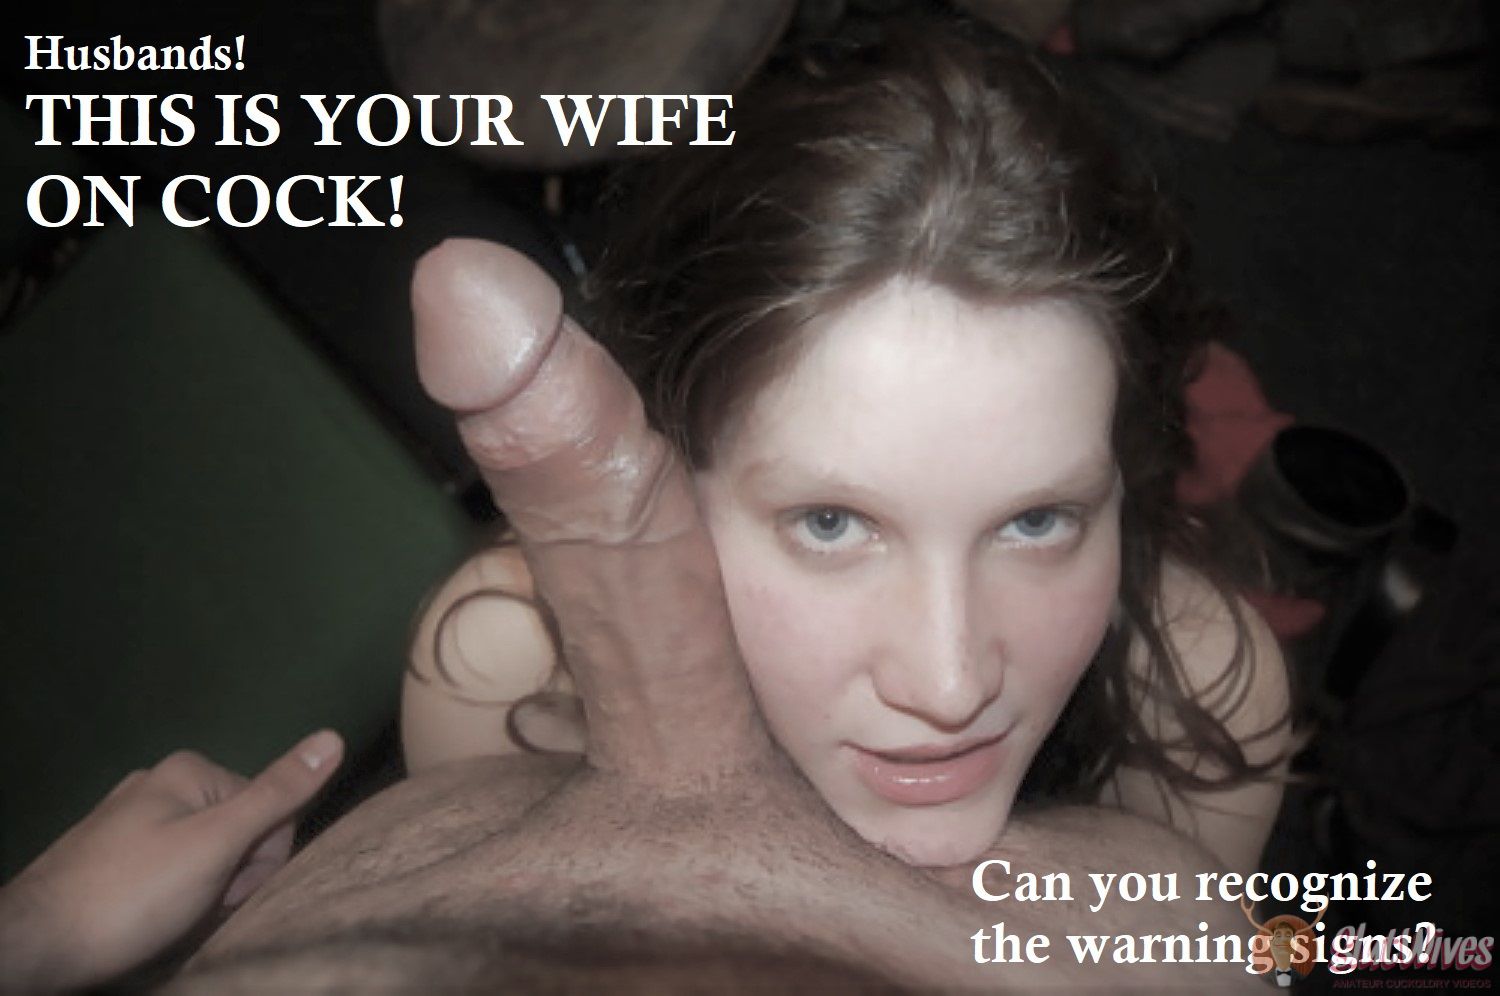 IS YOUR WIFE ON COCK?